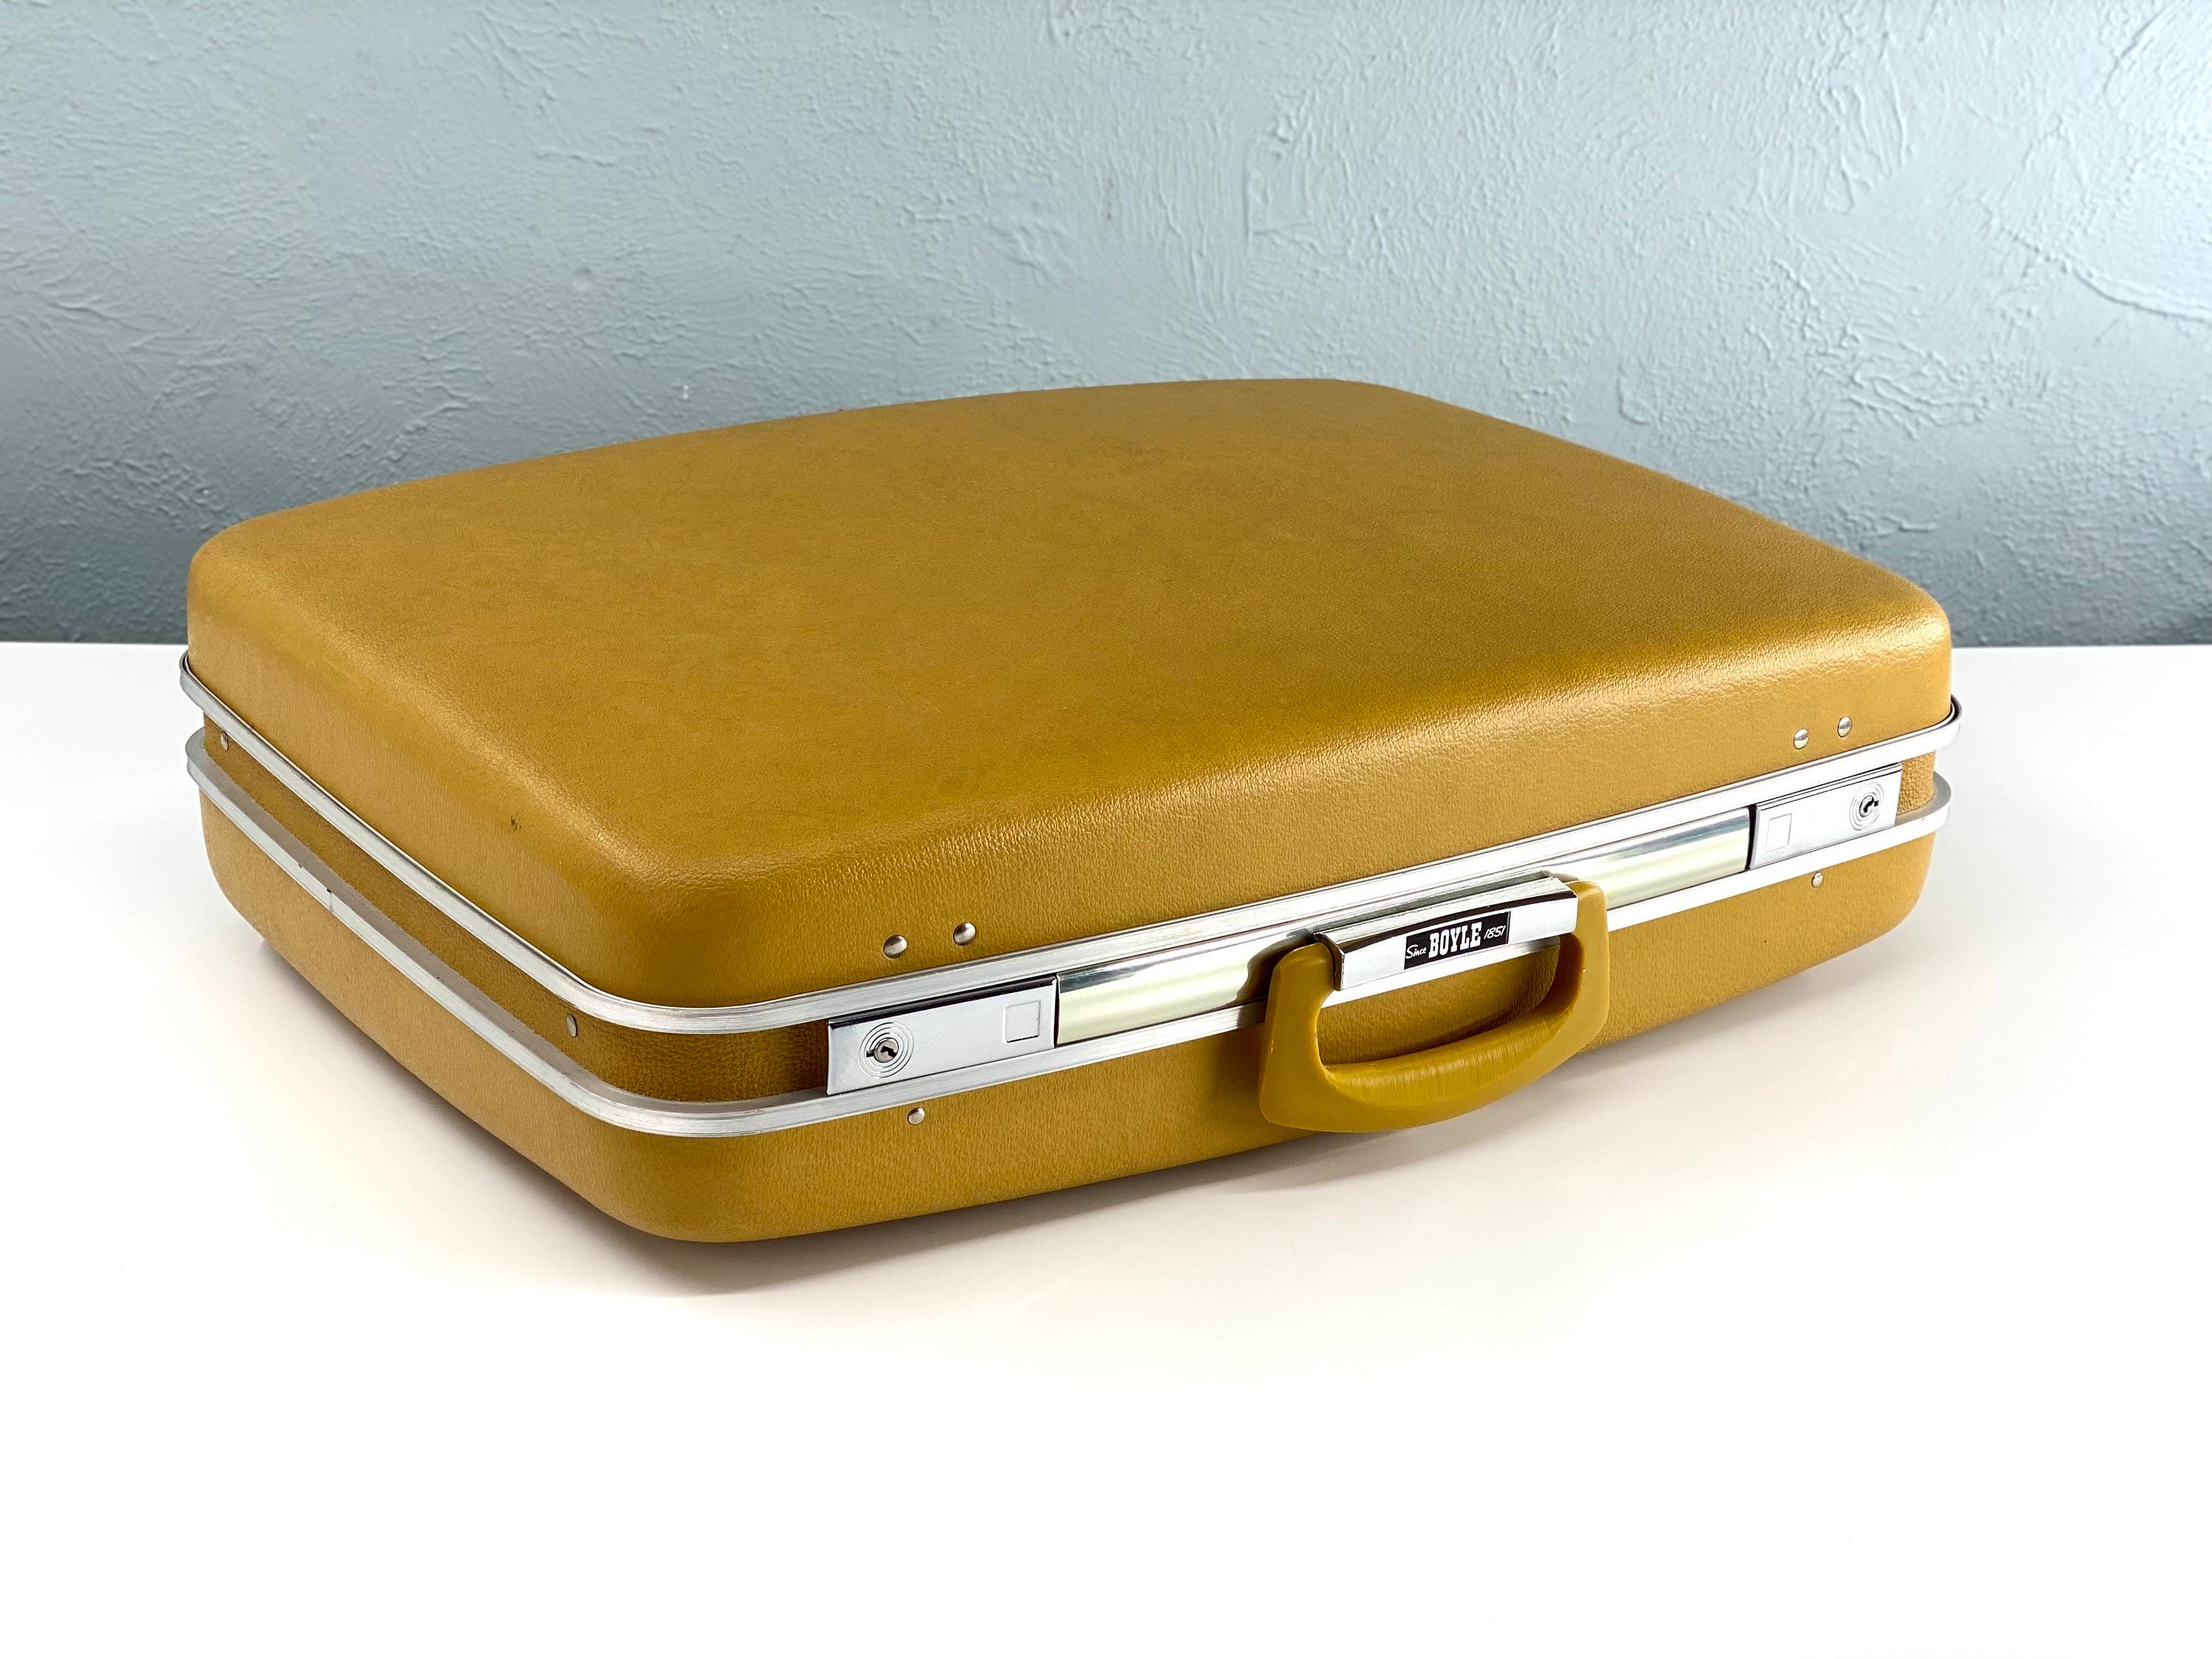 Vintage 1960s Jetliner by Dominion Luggage Hard Shell Case Hat Box